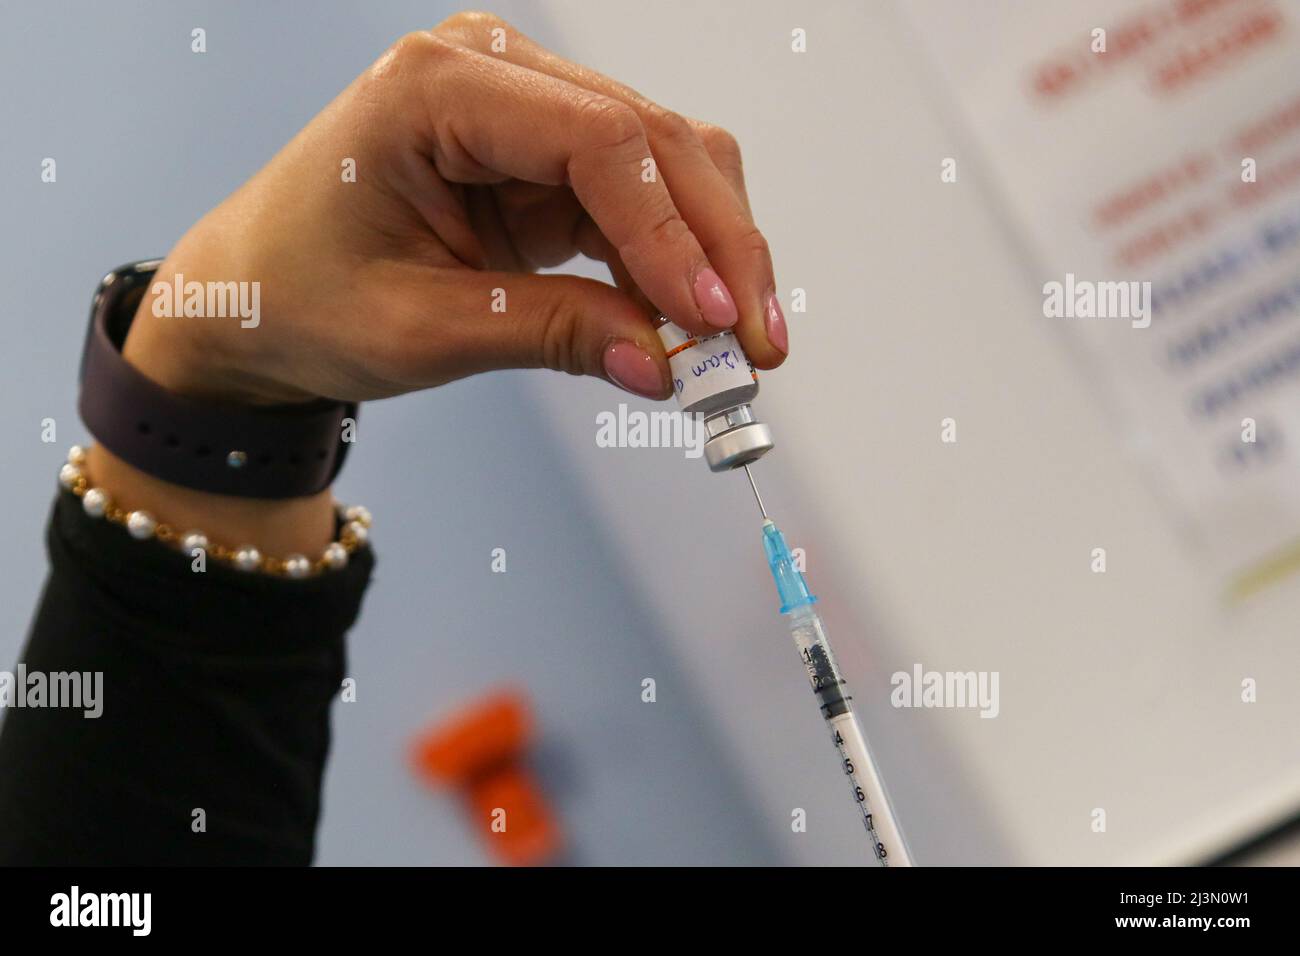 London. UK 8 Apr 2022- A doctor draws the first dose of the Pfizer COVID-19 jab as she prepares to administer the vaccine to a child under the age of 11 years at a vaccination centre. Parents and carers are encouraged to get children aged 5 to 11 their COVID-19 vaccine as over 5 million children in England are eligible for the jab. Children are offered two doses of the Pfizer/BioNTech vaccine, administered at least 12 weeks apart.  Credit Dinendra Haria /Alamy Live News Stock Photo